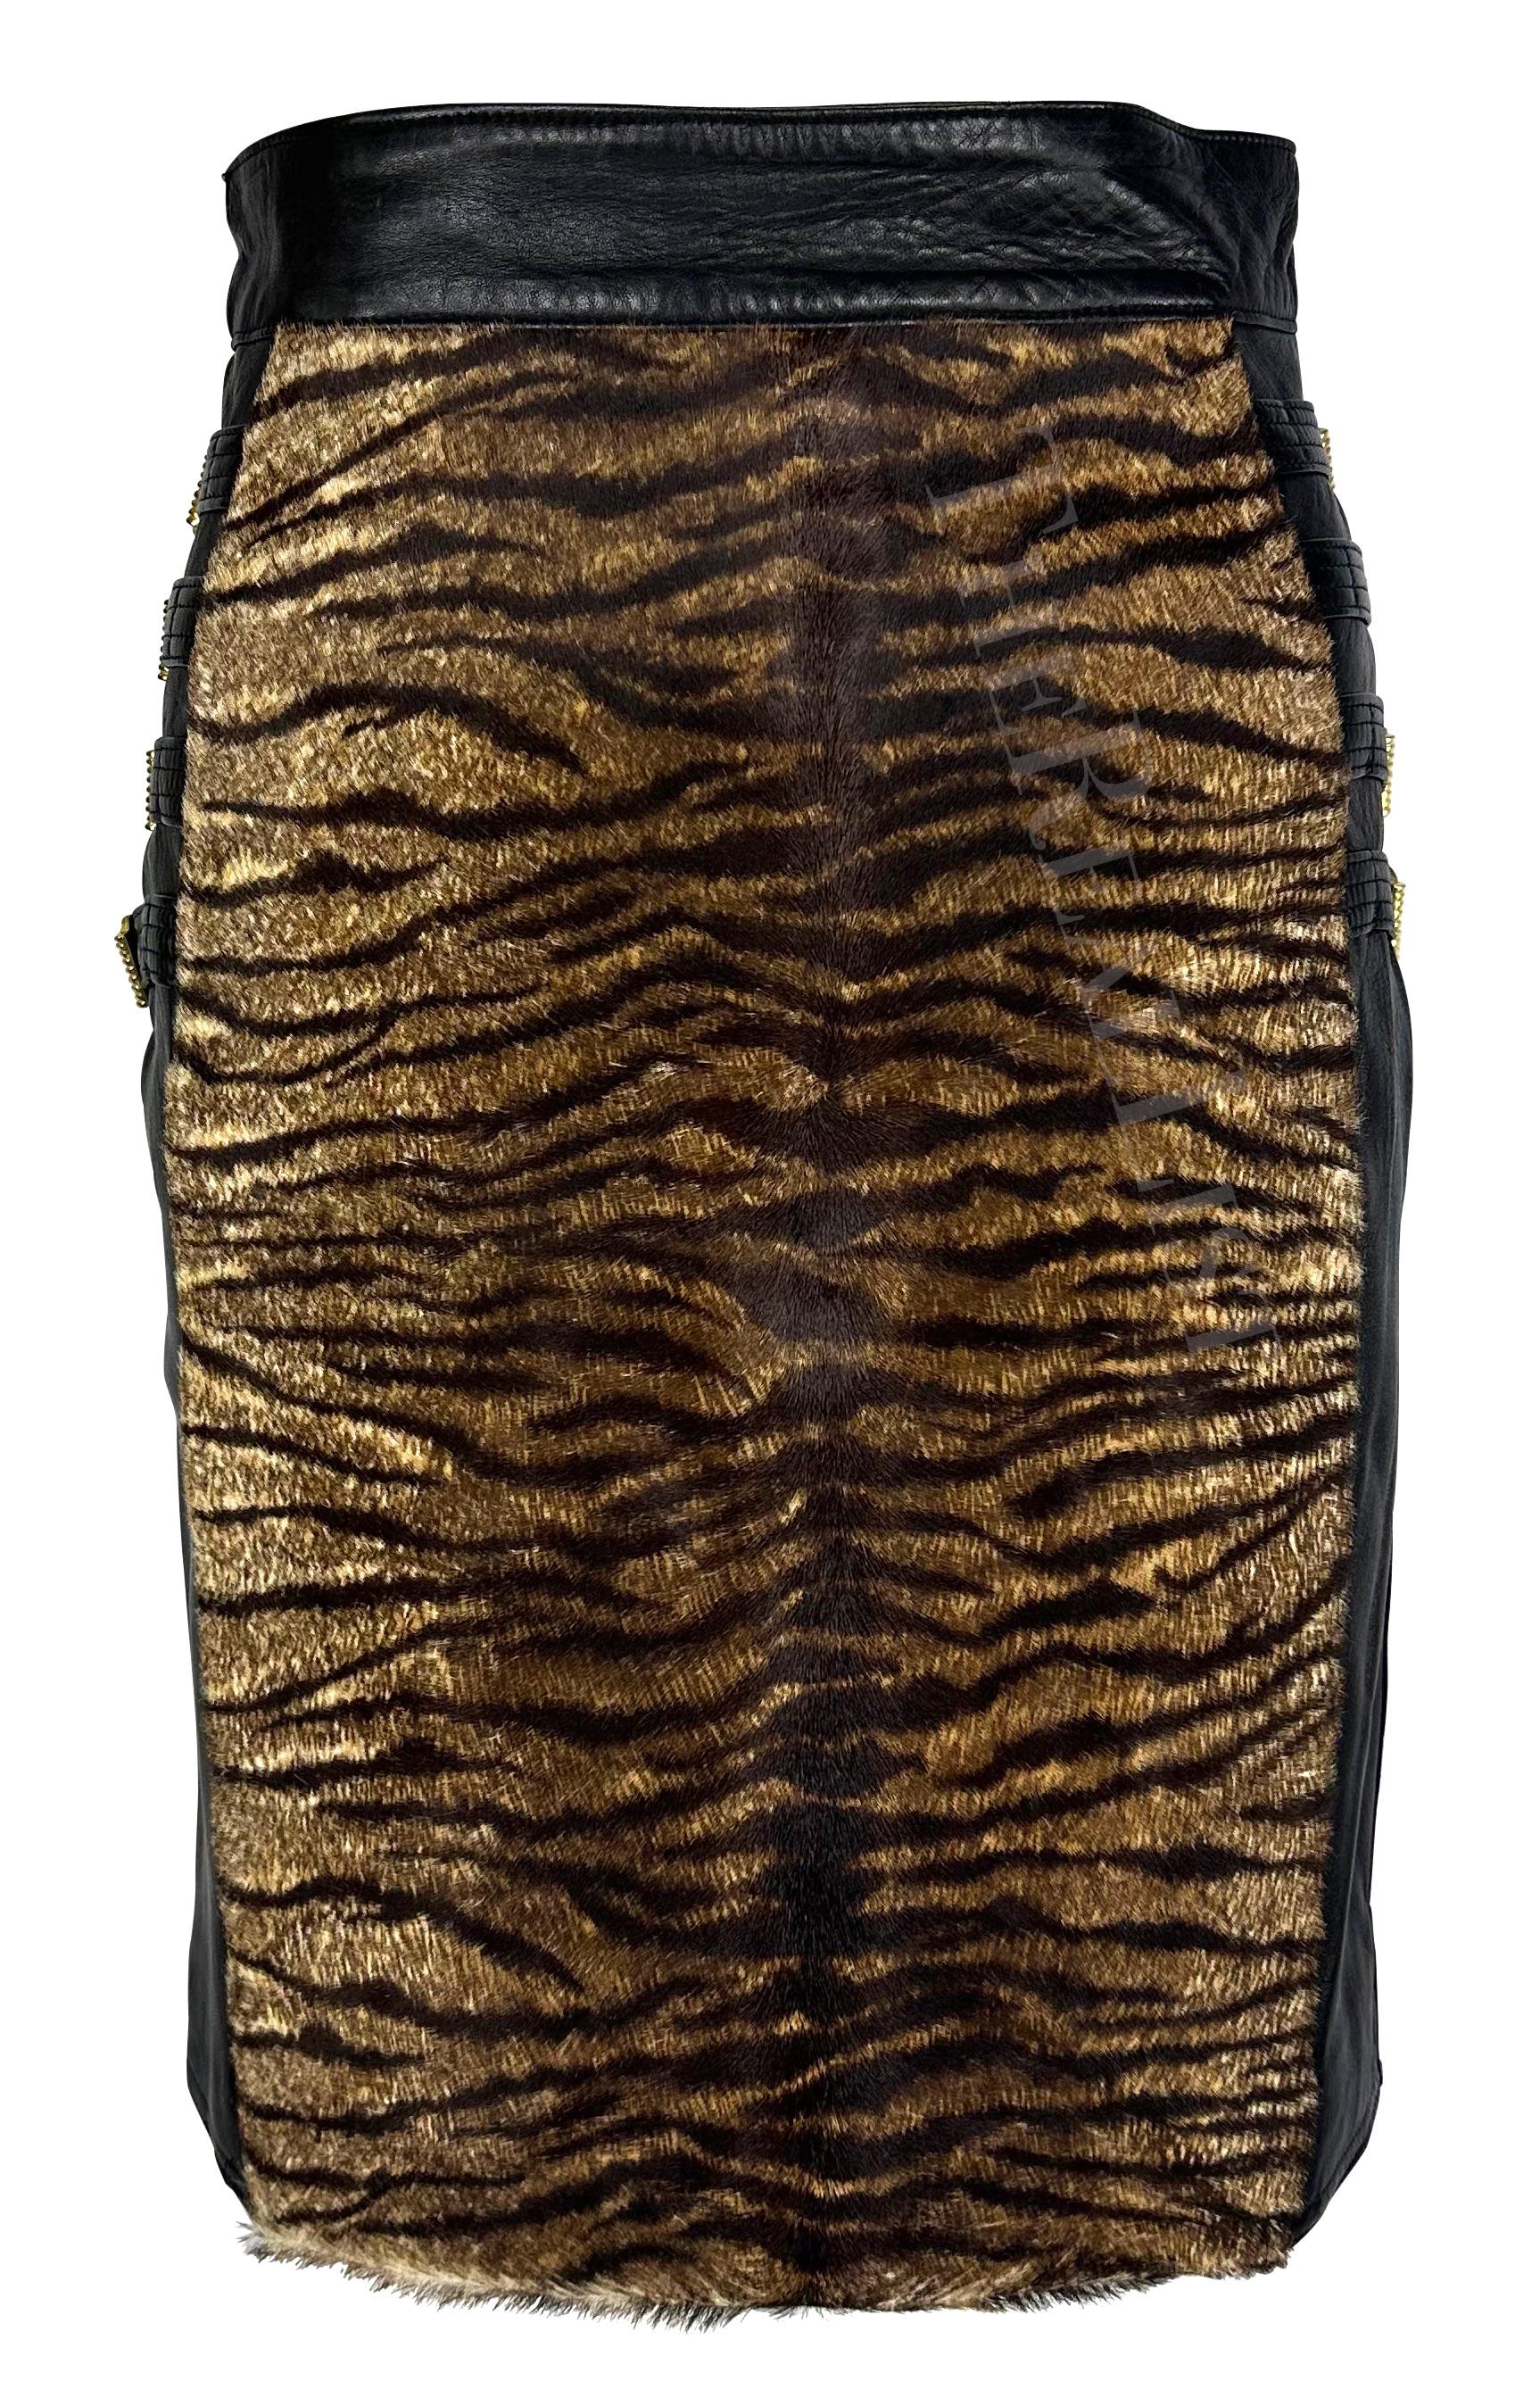 Presenting a fabulous black leather and pony hair Gianni Versace skirt, designed by Gianni Versace. From the Fall/Winter 1992 'Miss S&M' collection,  this skirt is constructed of black leather with a tiger print pony hair panel at the front. This